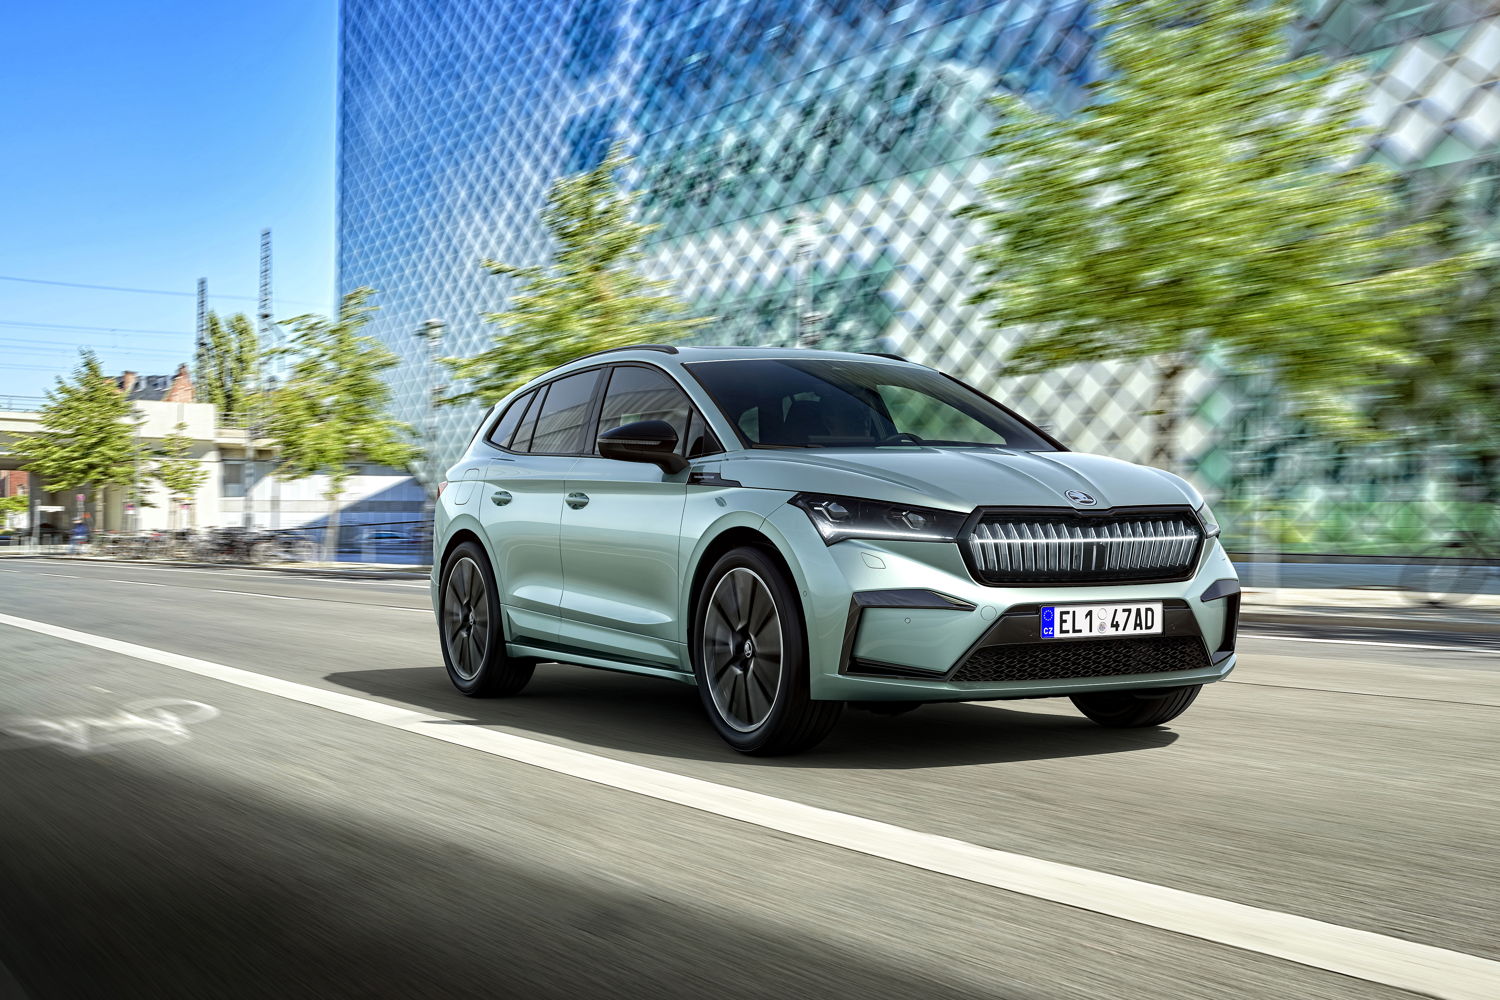 The all-electric ŠKODA ENYAQ iV made its debut in 2020. The battery-electric SUV is the first ŠKODA model to be based on the Volkswagen Group's Modular Electrification Toolkit (MEB).